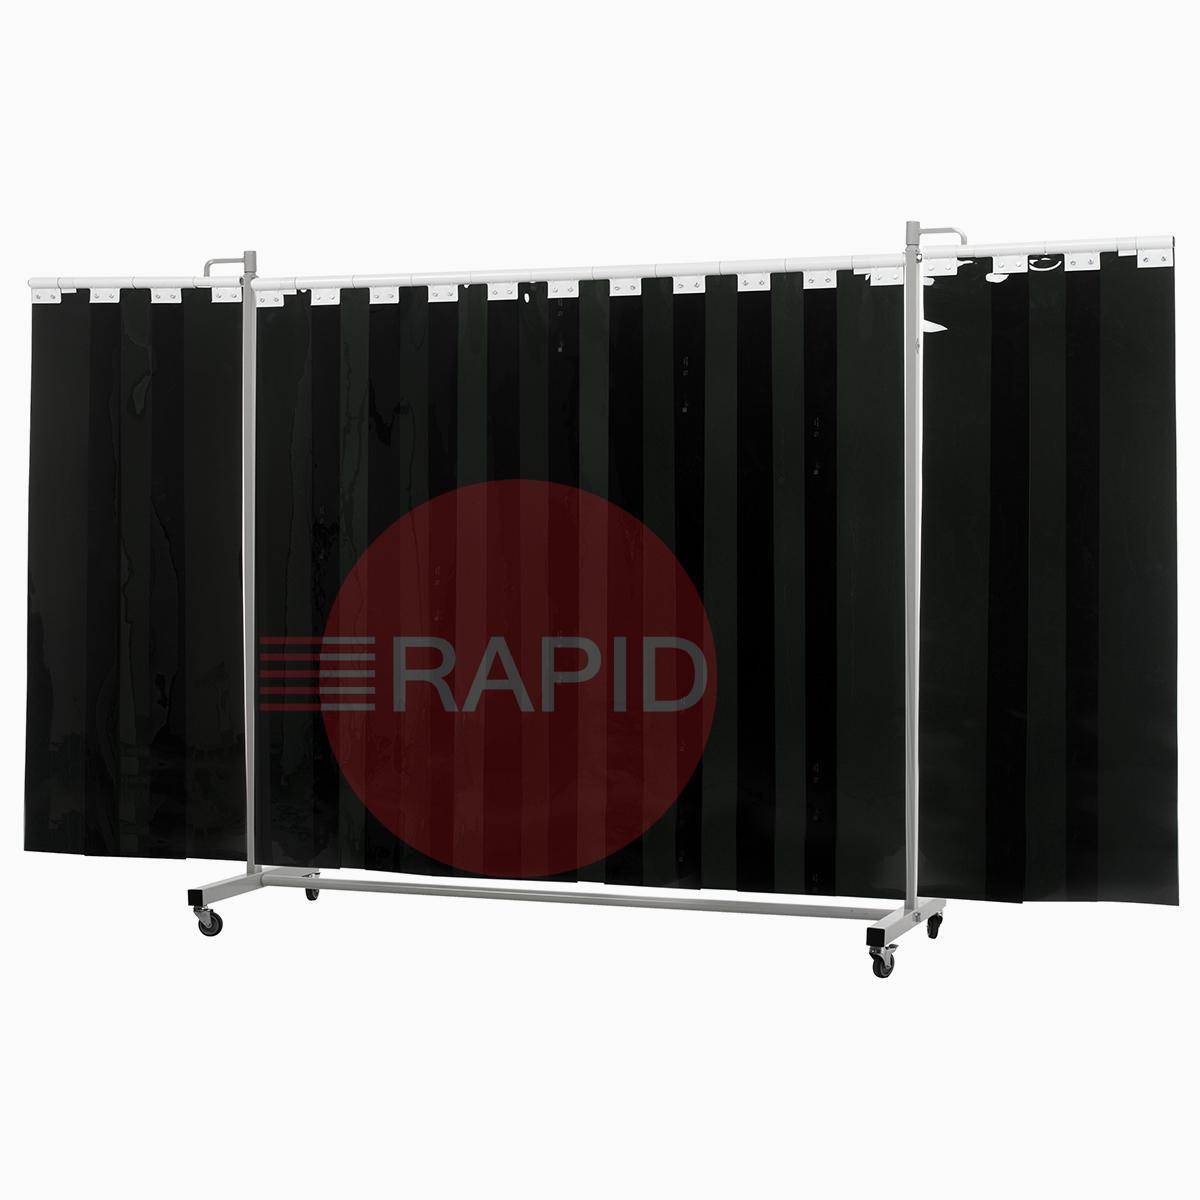 36.31.29  CEPRO Robusto Triptych Welding Screen with Green-9 Strips - 3.6m Wide x 2.2m High, Approved EN 25980